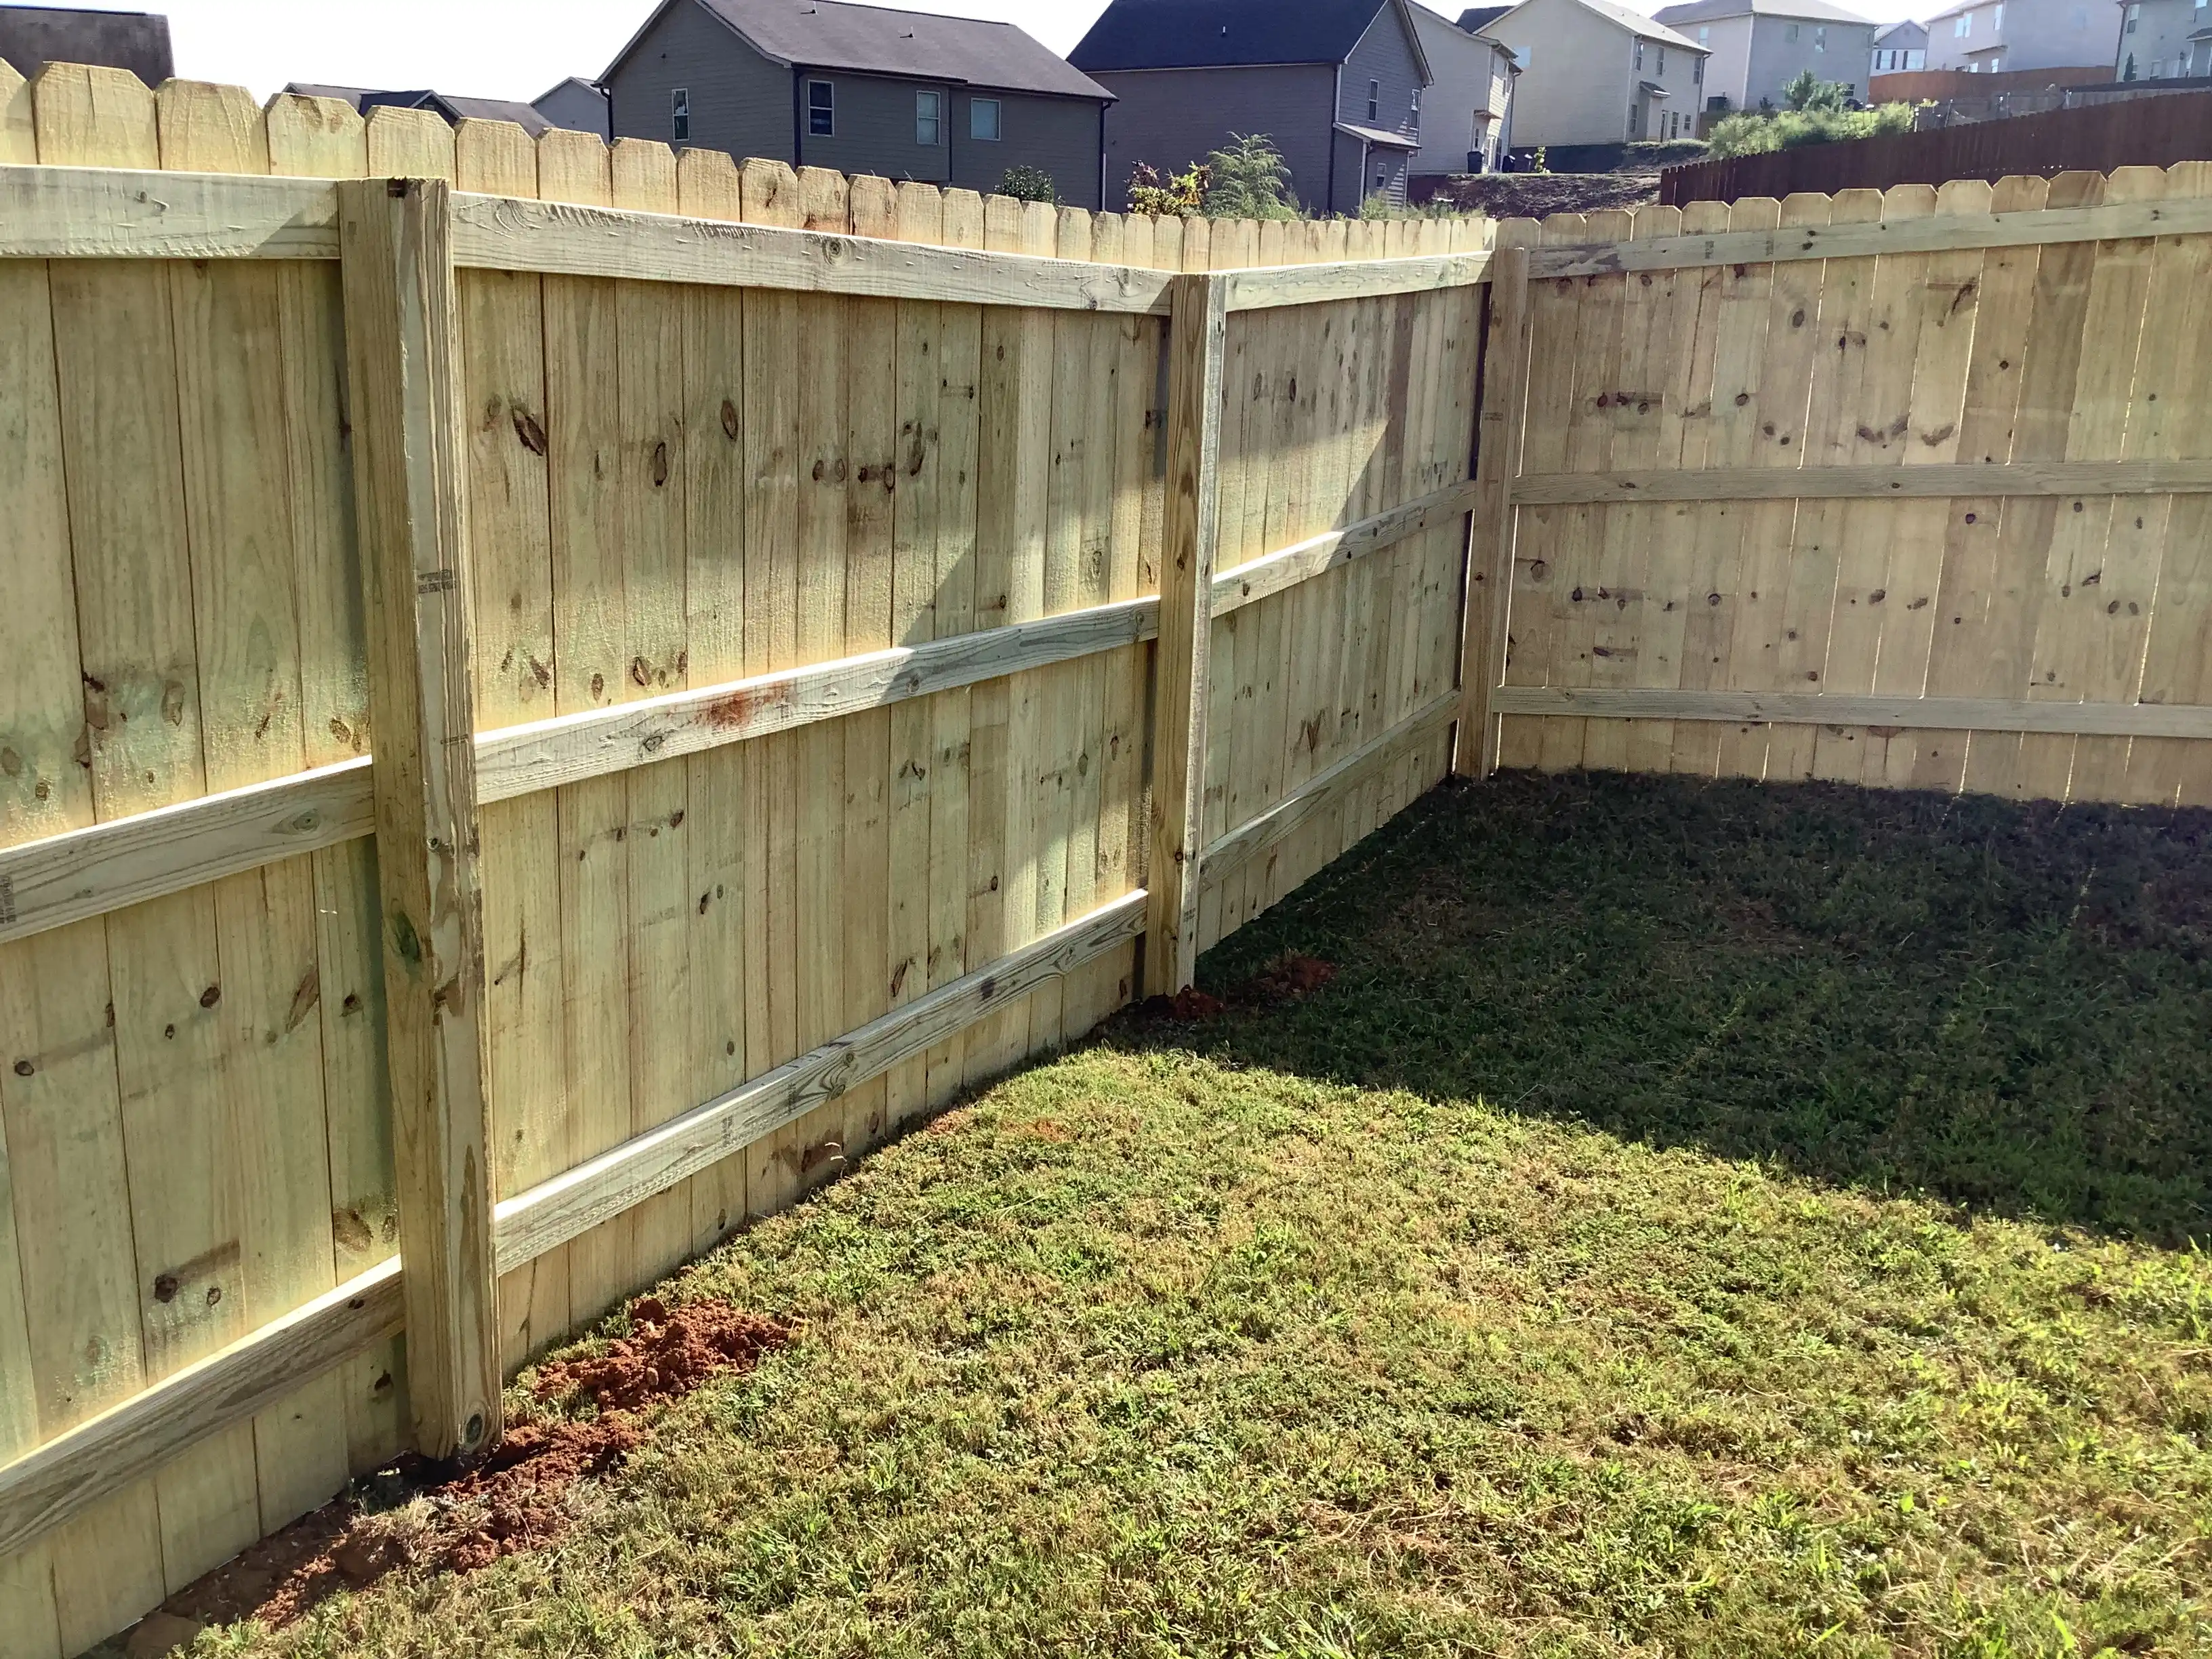 Residential wooden fence